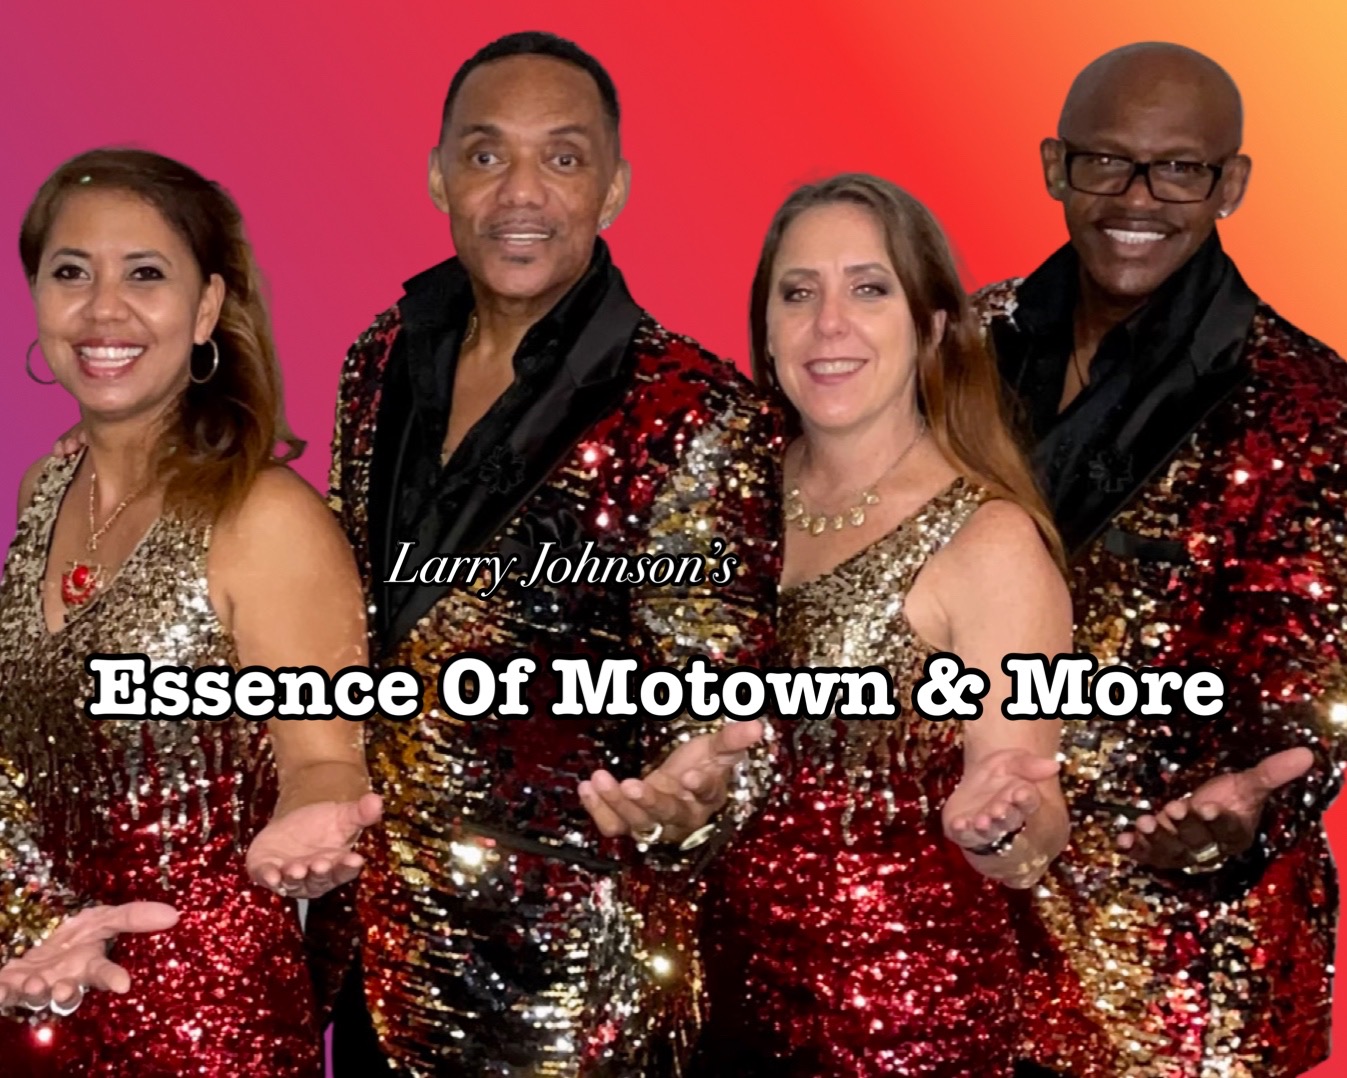 THE ESSENCE OF MOTOWN! 